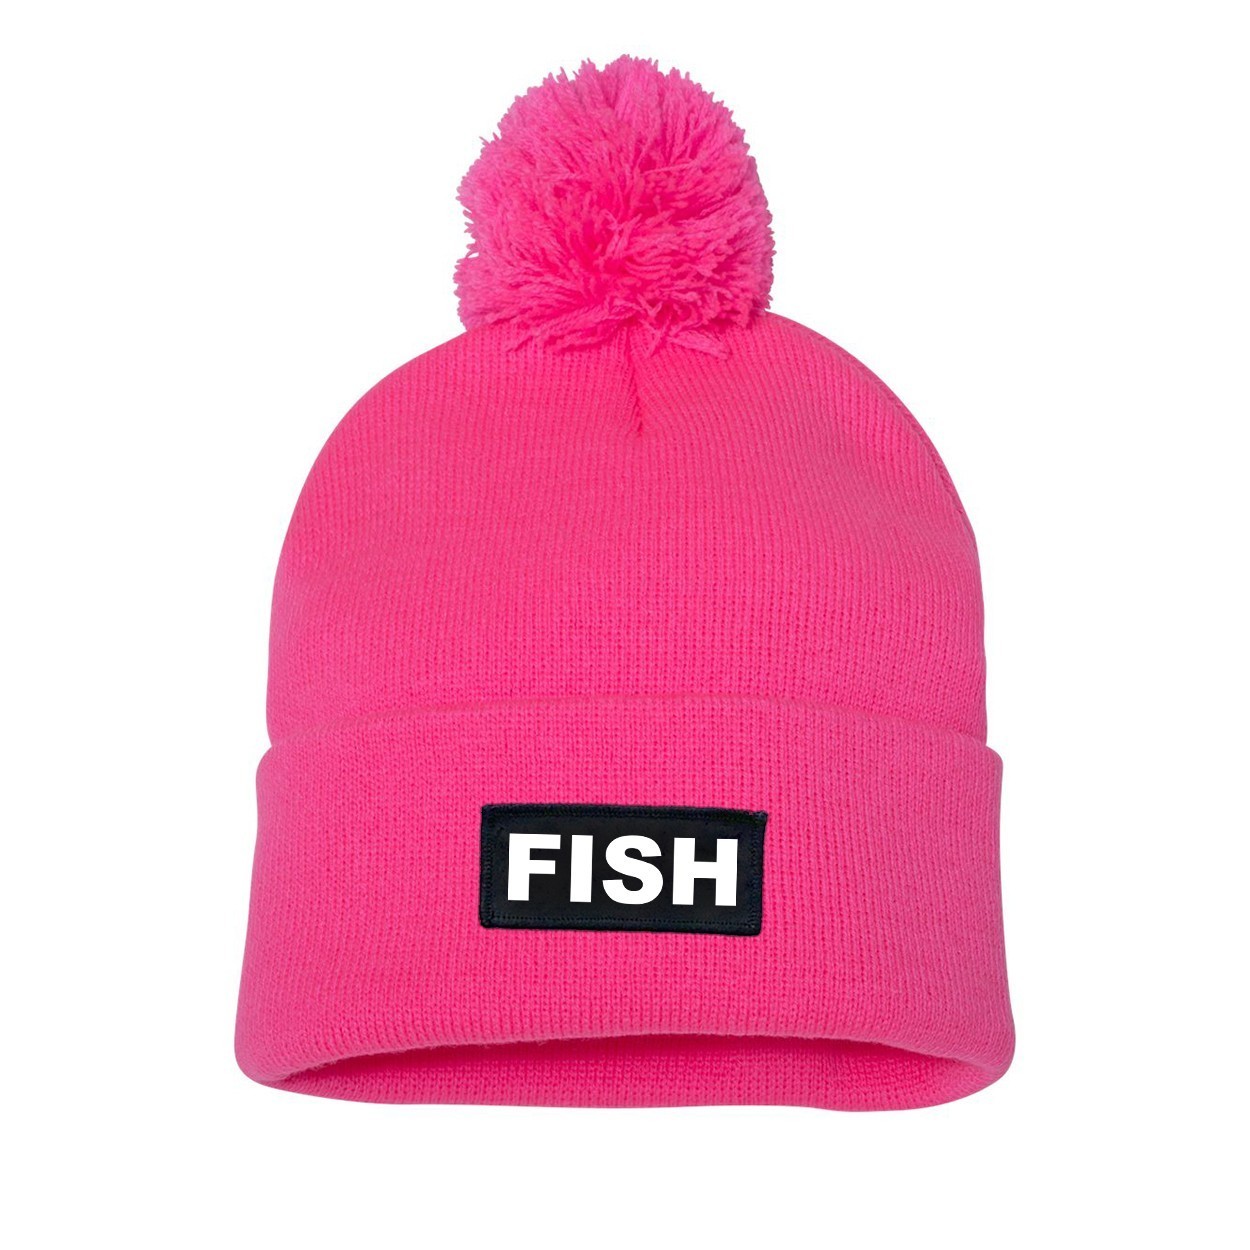 Fish Brand Logo Night Out Woven Patch Roll Up Pom Knit Beanie Pink (White Logo)